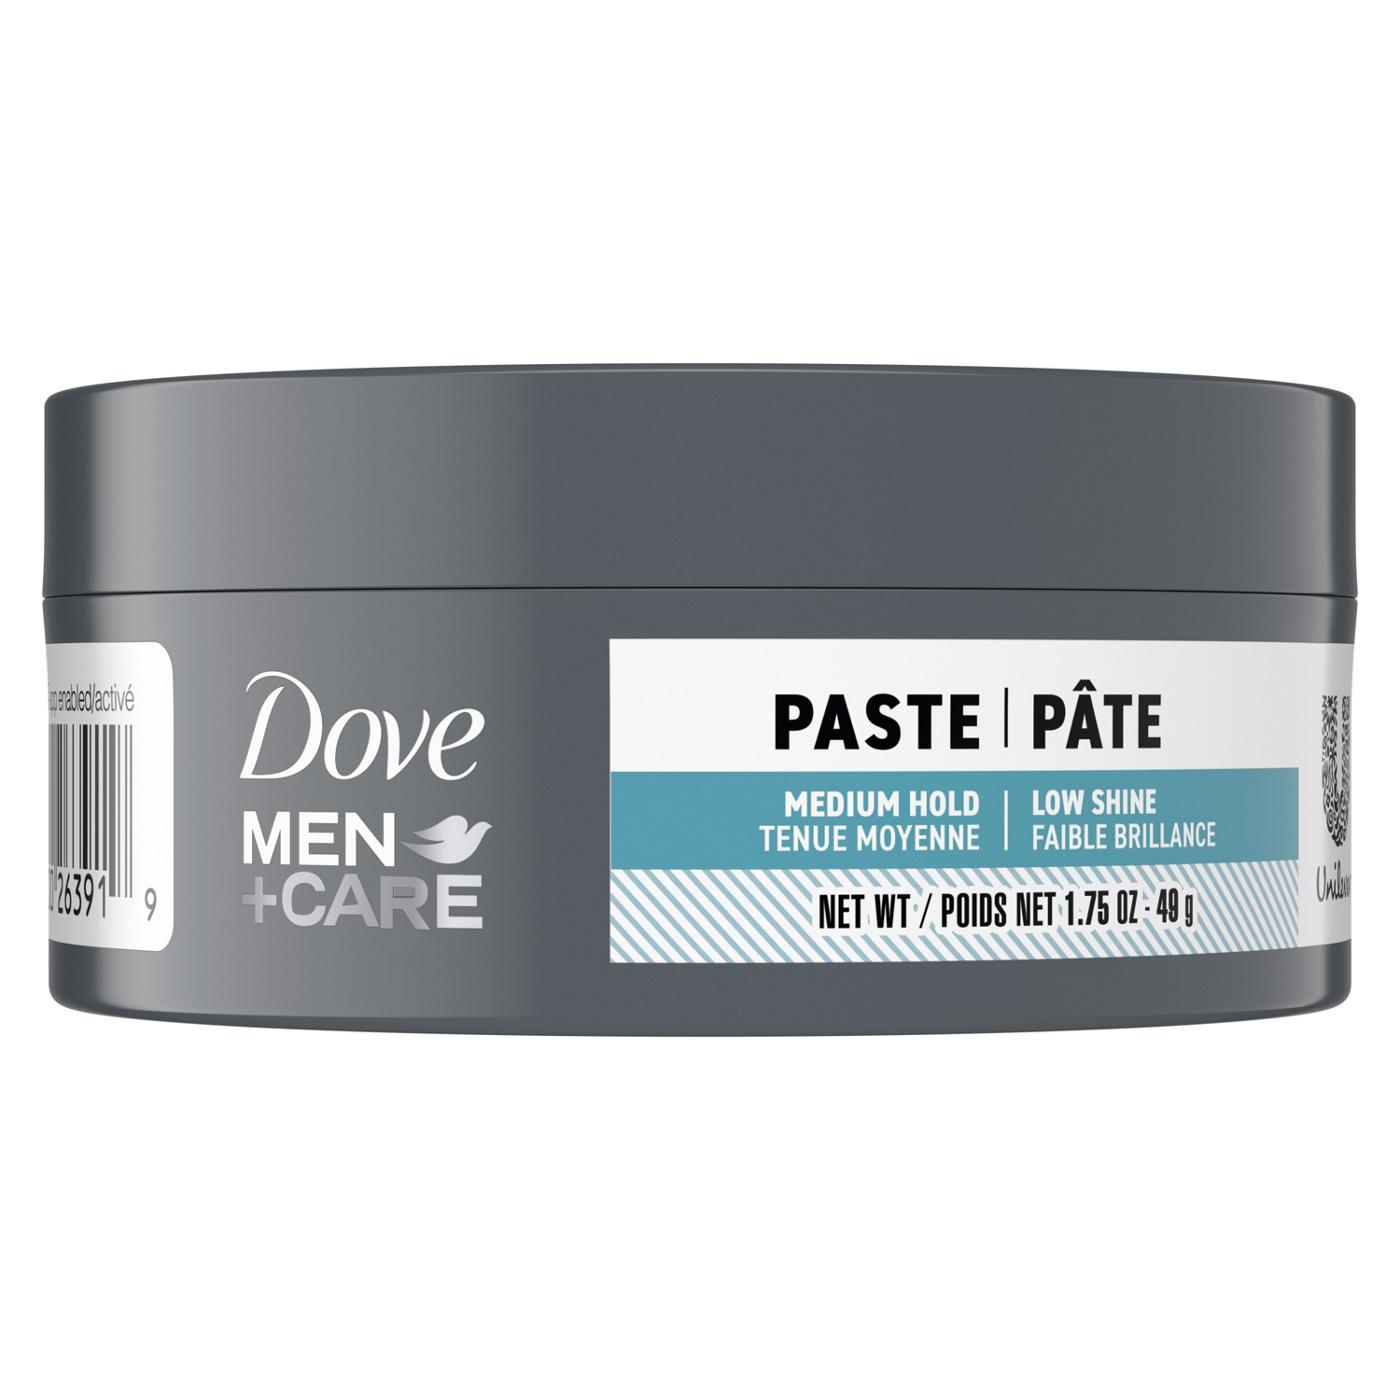 Dove Men+Care Styling Aid Sculpting Hair Paste; image 1 of 6